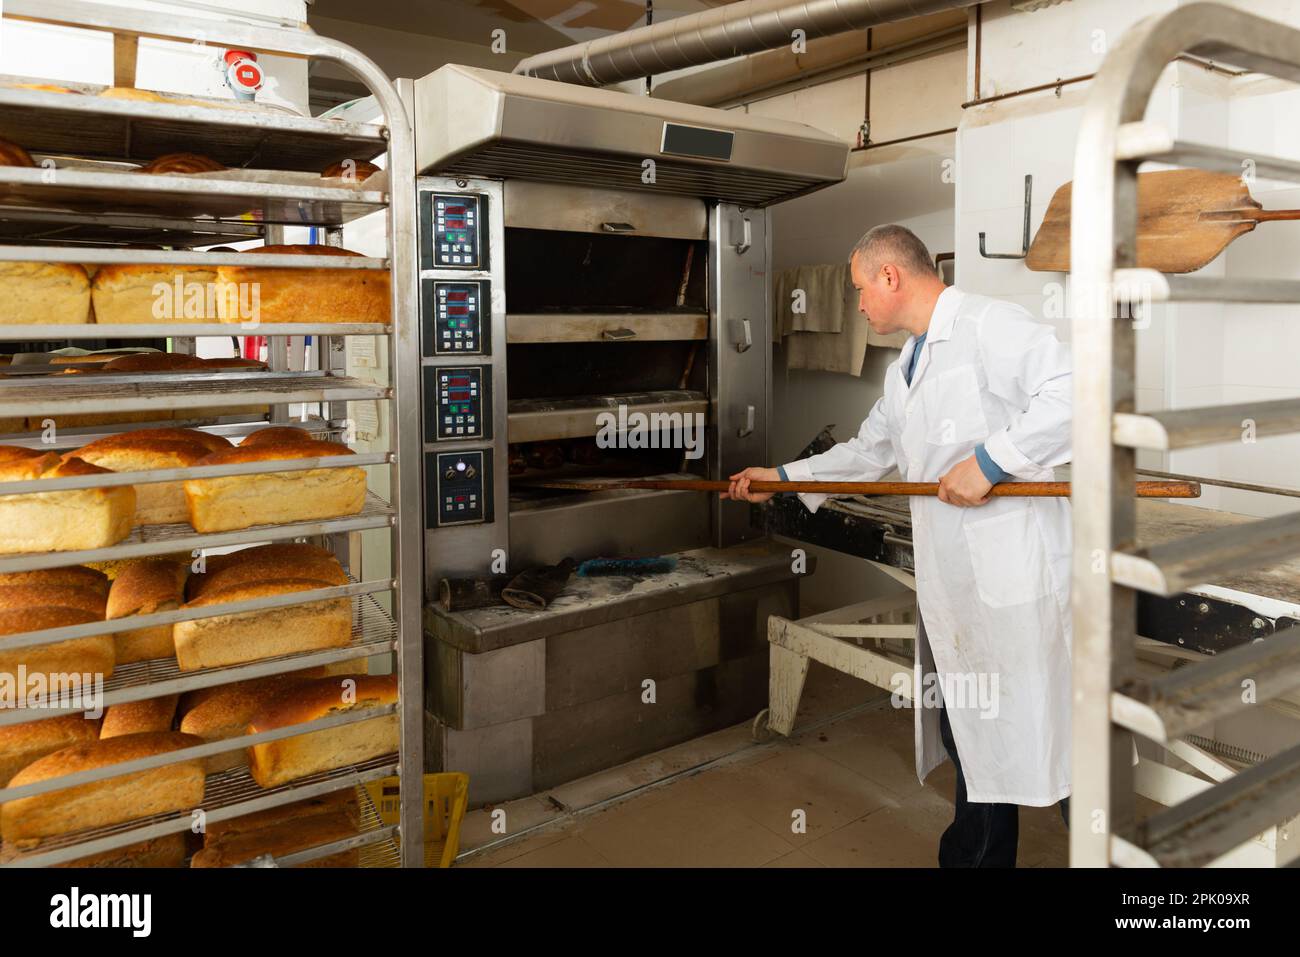 Bakery worker pulling loaves from oven Stock Photo